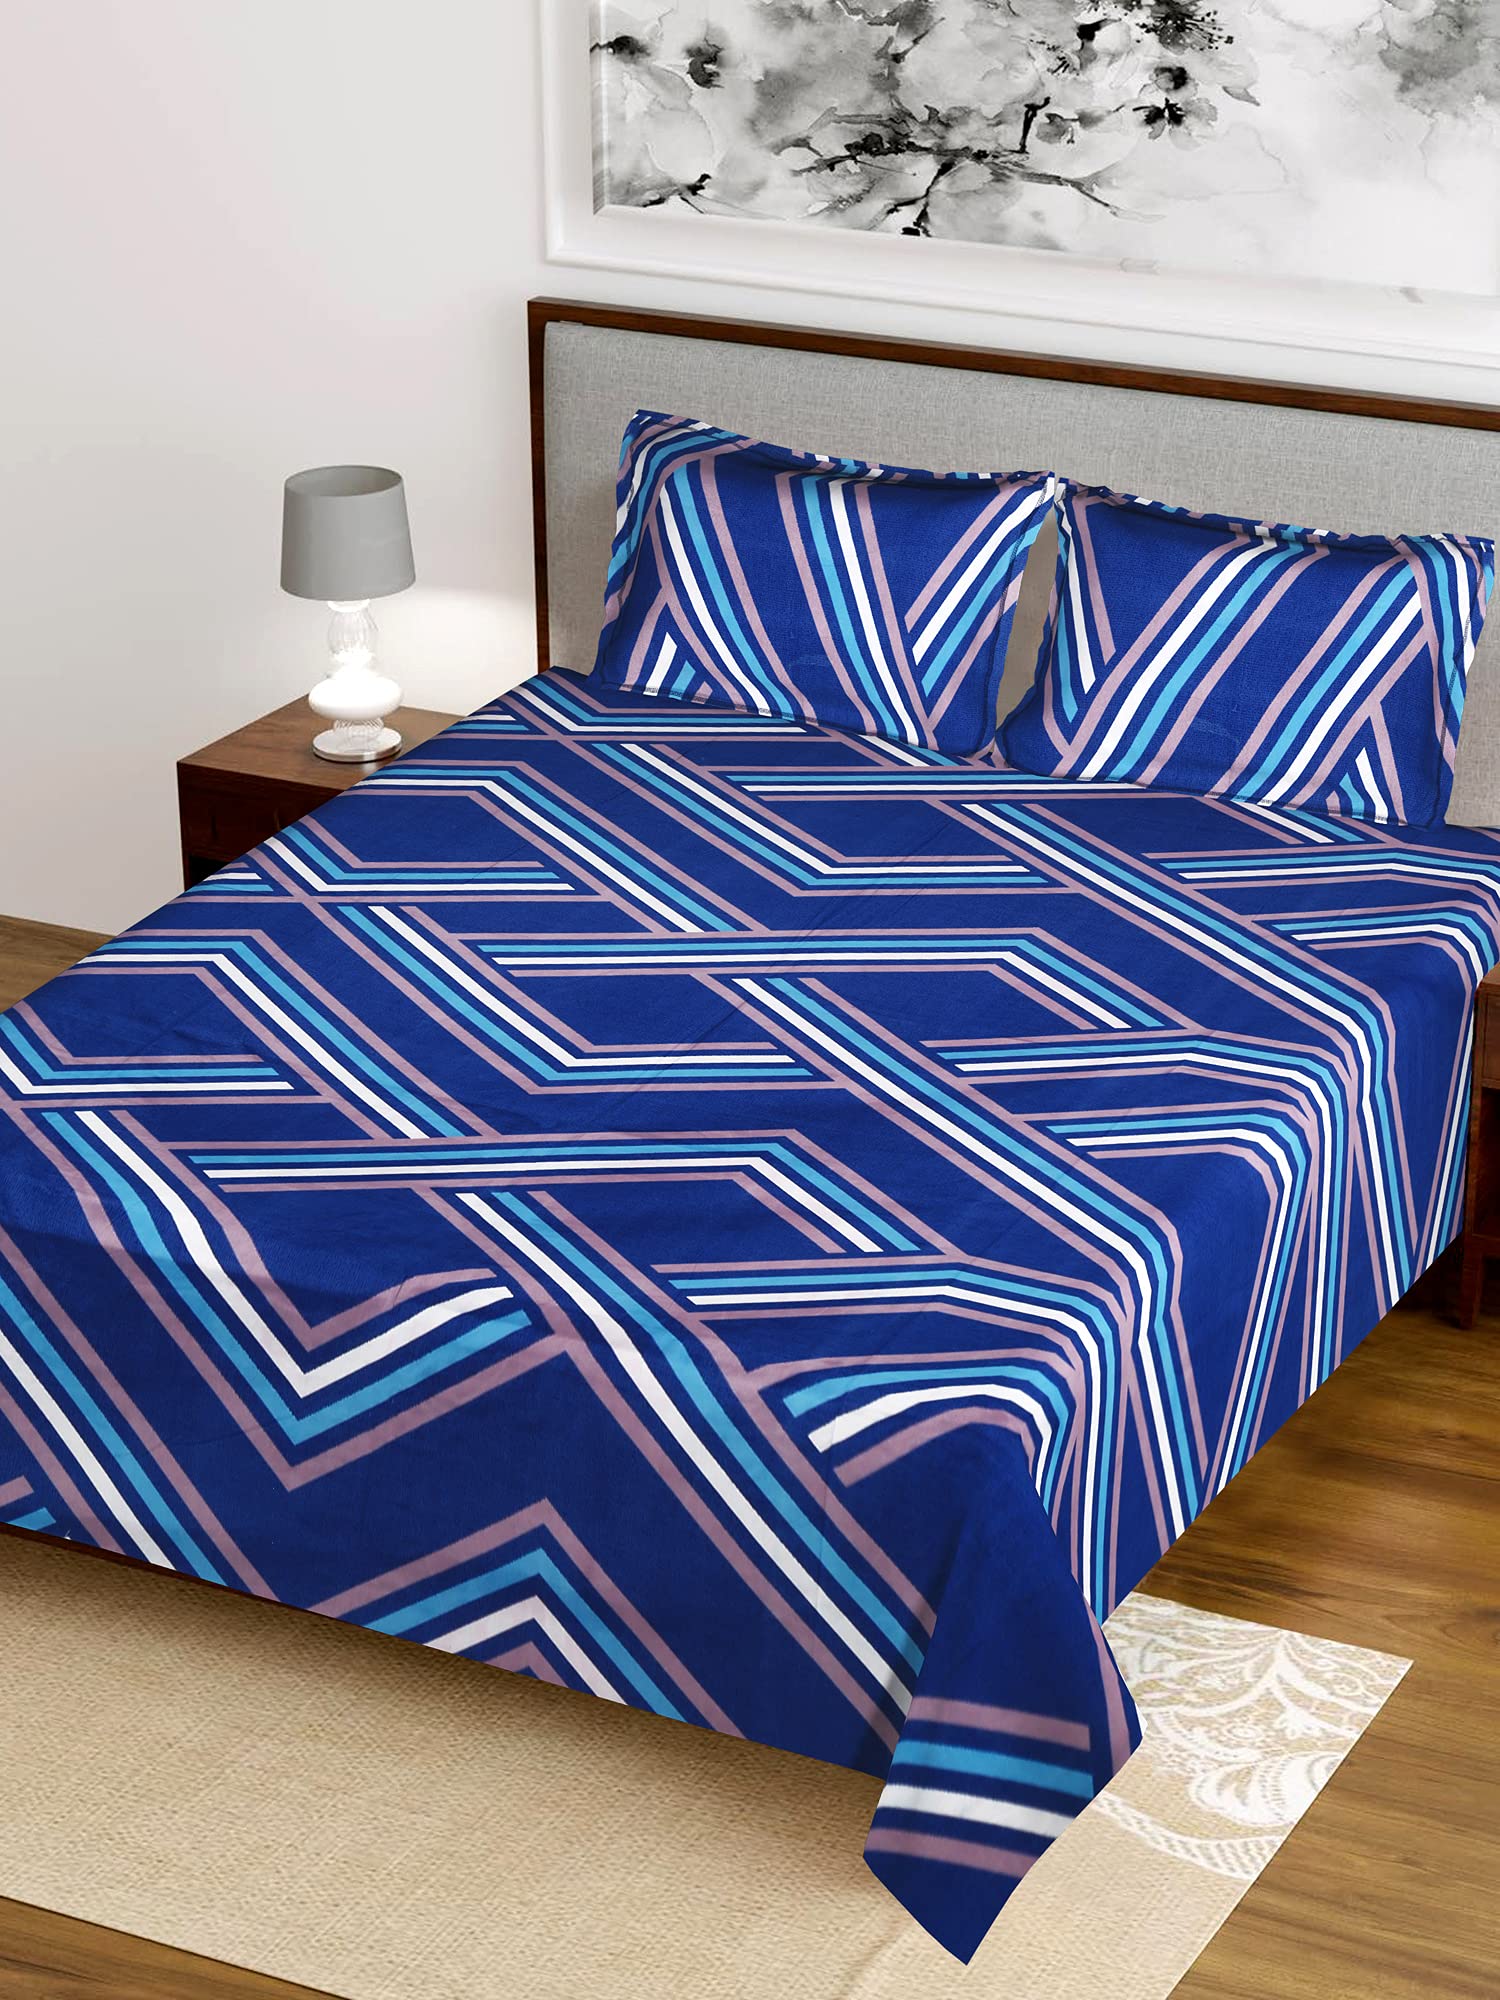 Kuber Industries Zig Zag Printed Glace Cotton Double Bedsheet with 2 Pillow Covers (Blue)-HS43KUBMART26798